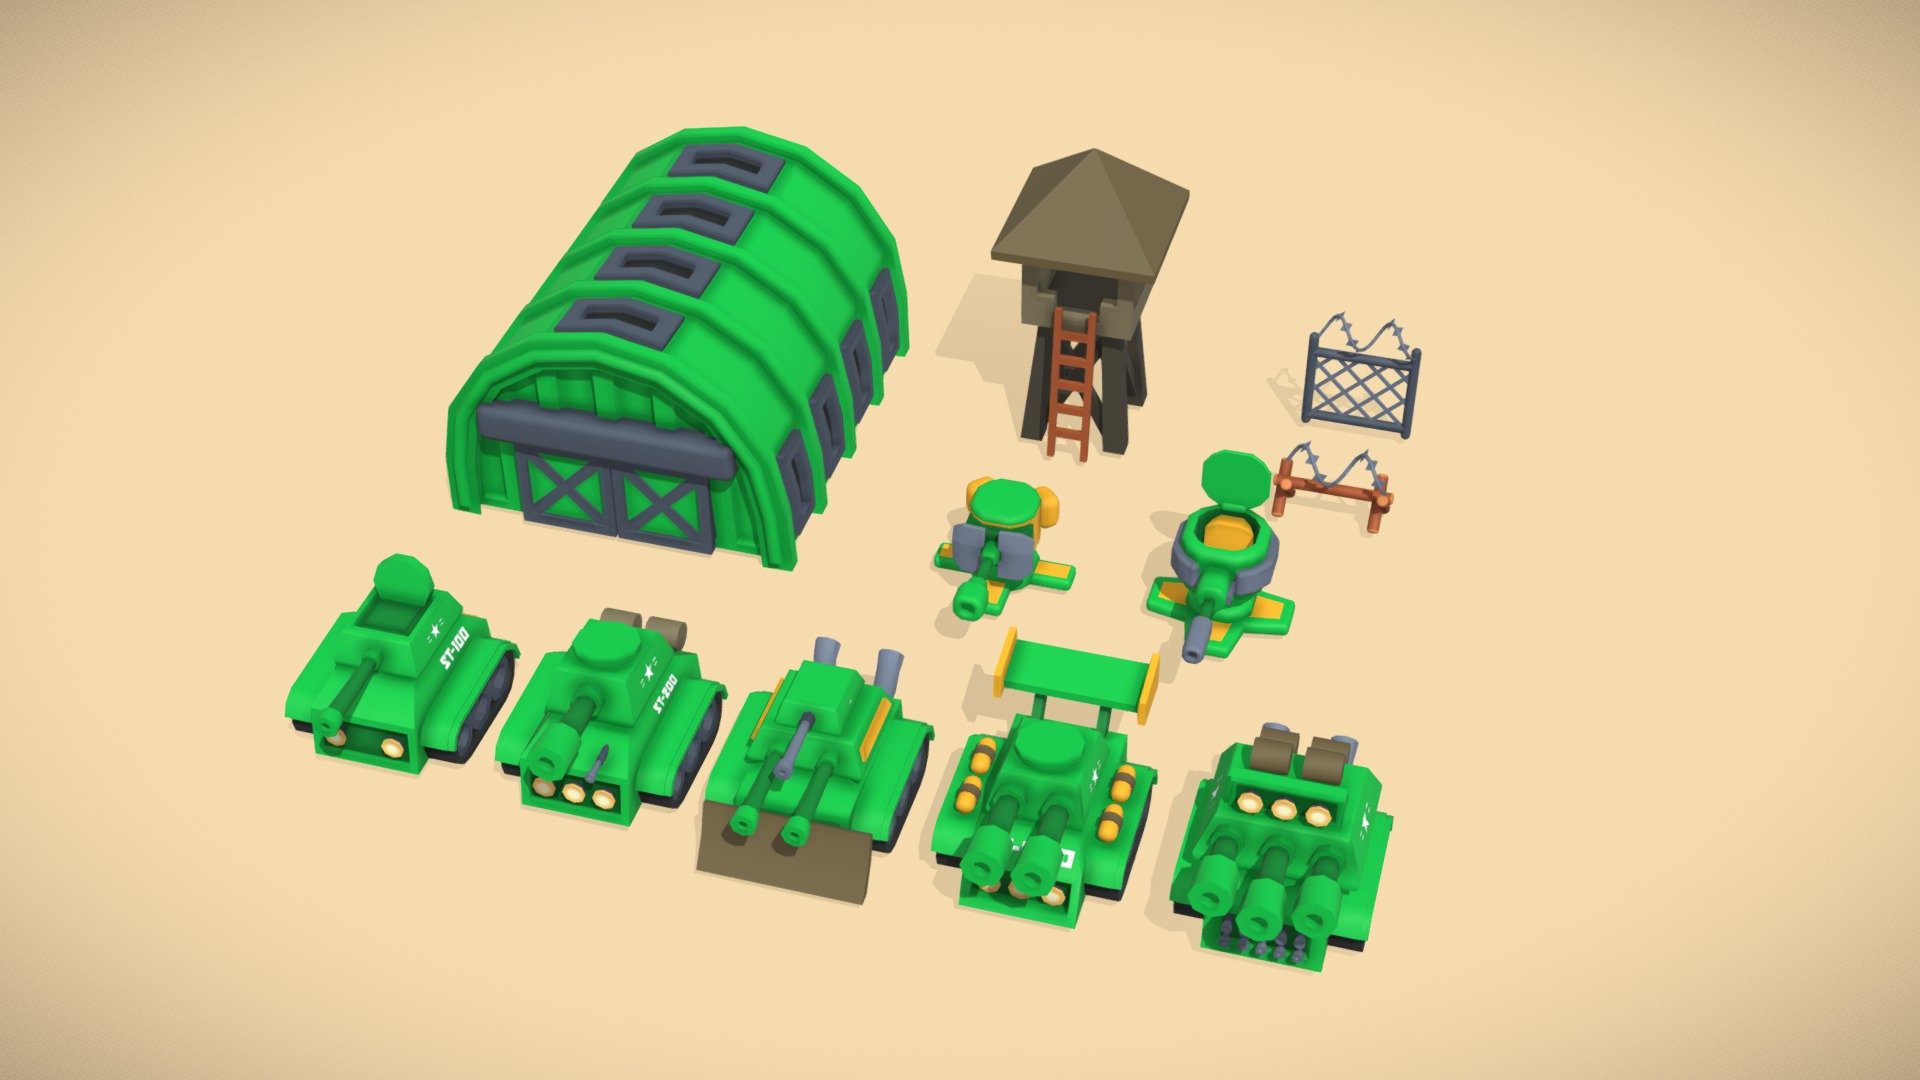 Mobile game ready. One texutre. Single material.
In this kit you will get:
- 5 different tank models
- 2 types of turrets
- 2 fences
- 1 army base
-  1 watch tower - Stylized Army game kit Low poly - Buy Royalty Free 3D model by Bob.Ho 3d model